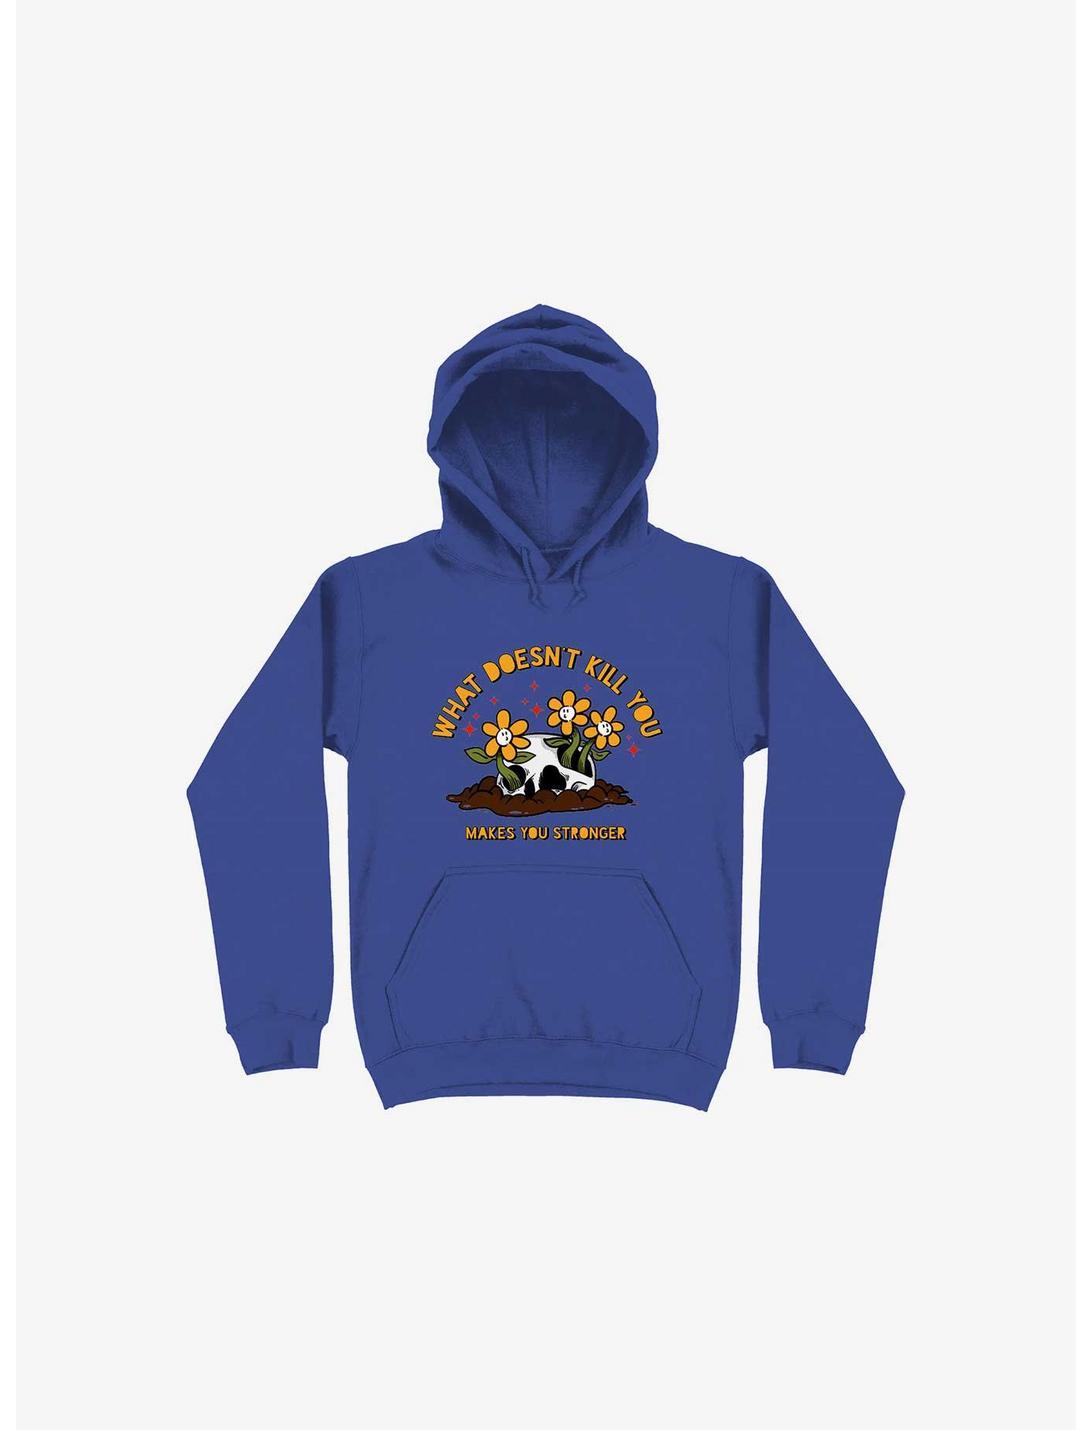 What Doesn't Kill You Makes You Stronger Hoodie, ROYAL, hi-res